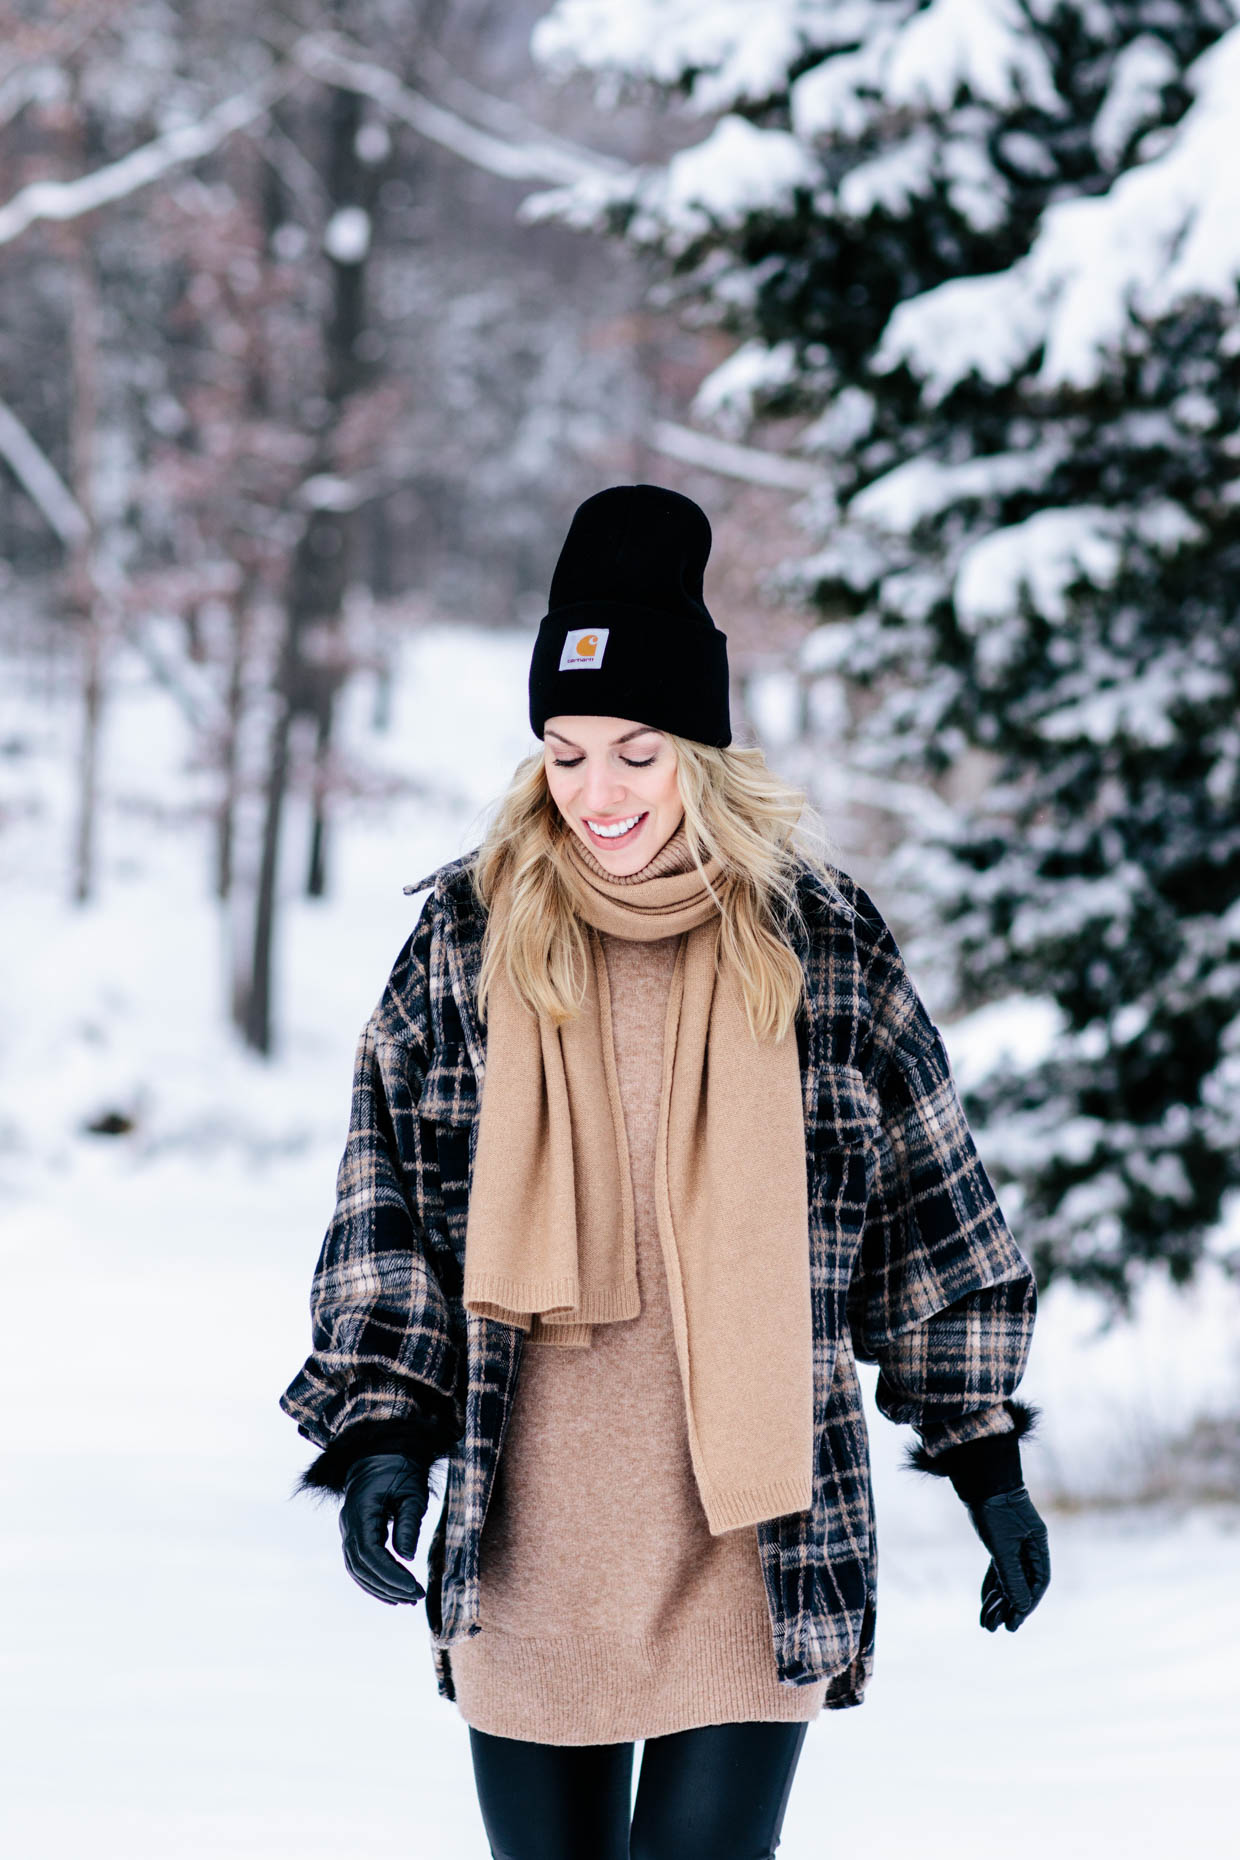 https://www.meagansmoda.com/wp-content/uploads/2020/12/Meagan-Brandon-fashion-blogger-of-Meagans-Moda-wears-plaid-shacket-with-camel-scarf-and-Carharrt-beanie-winter-outfit-how-to-wear-a-shacket.jpg